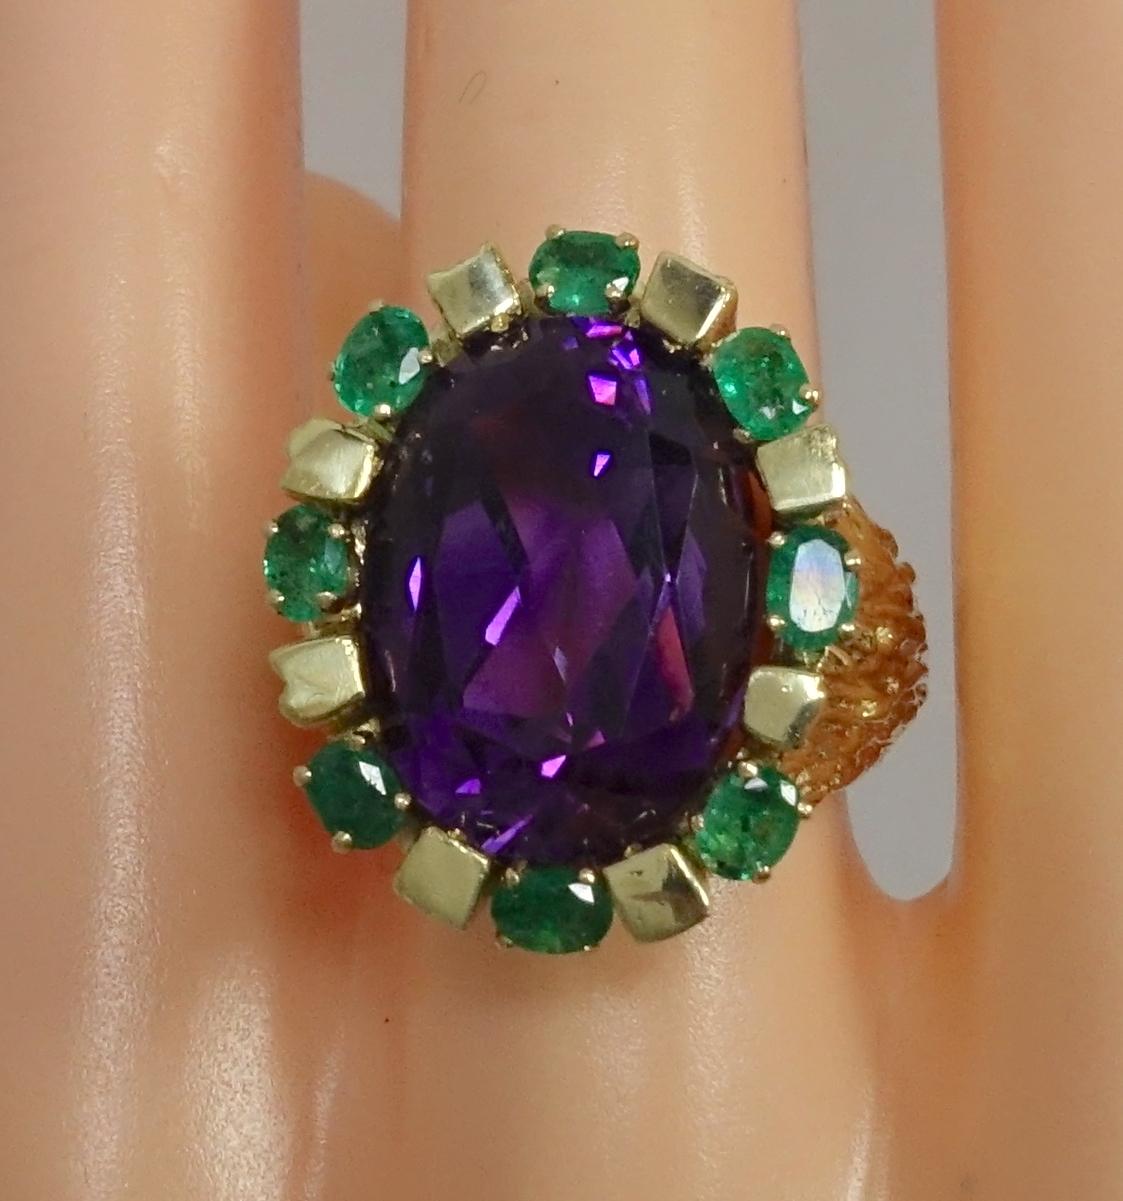 This vintage ring features a large 12 Carat oval cut amethyst with 1/2 carat of oval cut emeralds in a 14 Karat gold setting.  In excellent condition, this ring is a size 9 and measures 1” x 3/4” across the top. The ring can be sized.